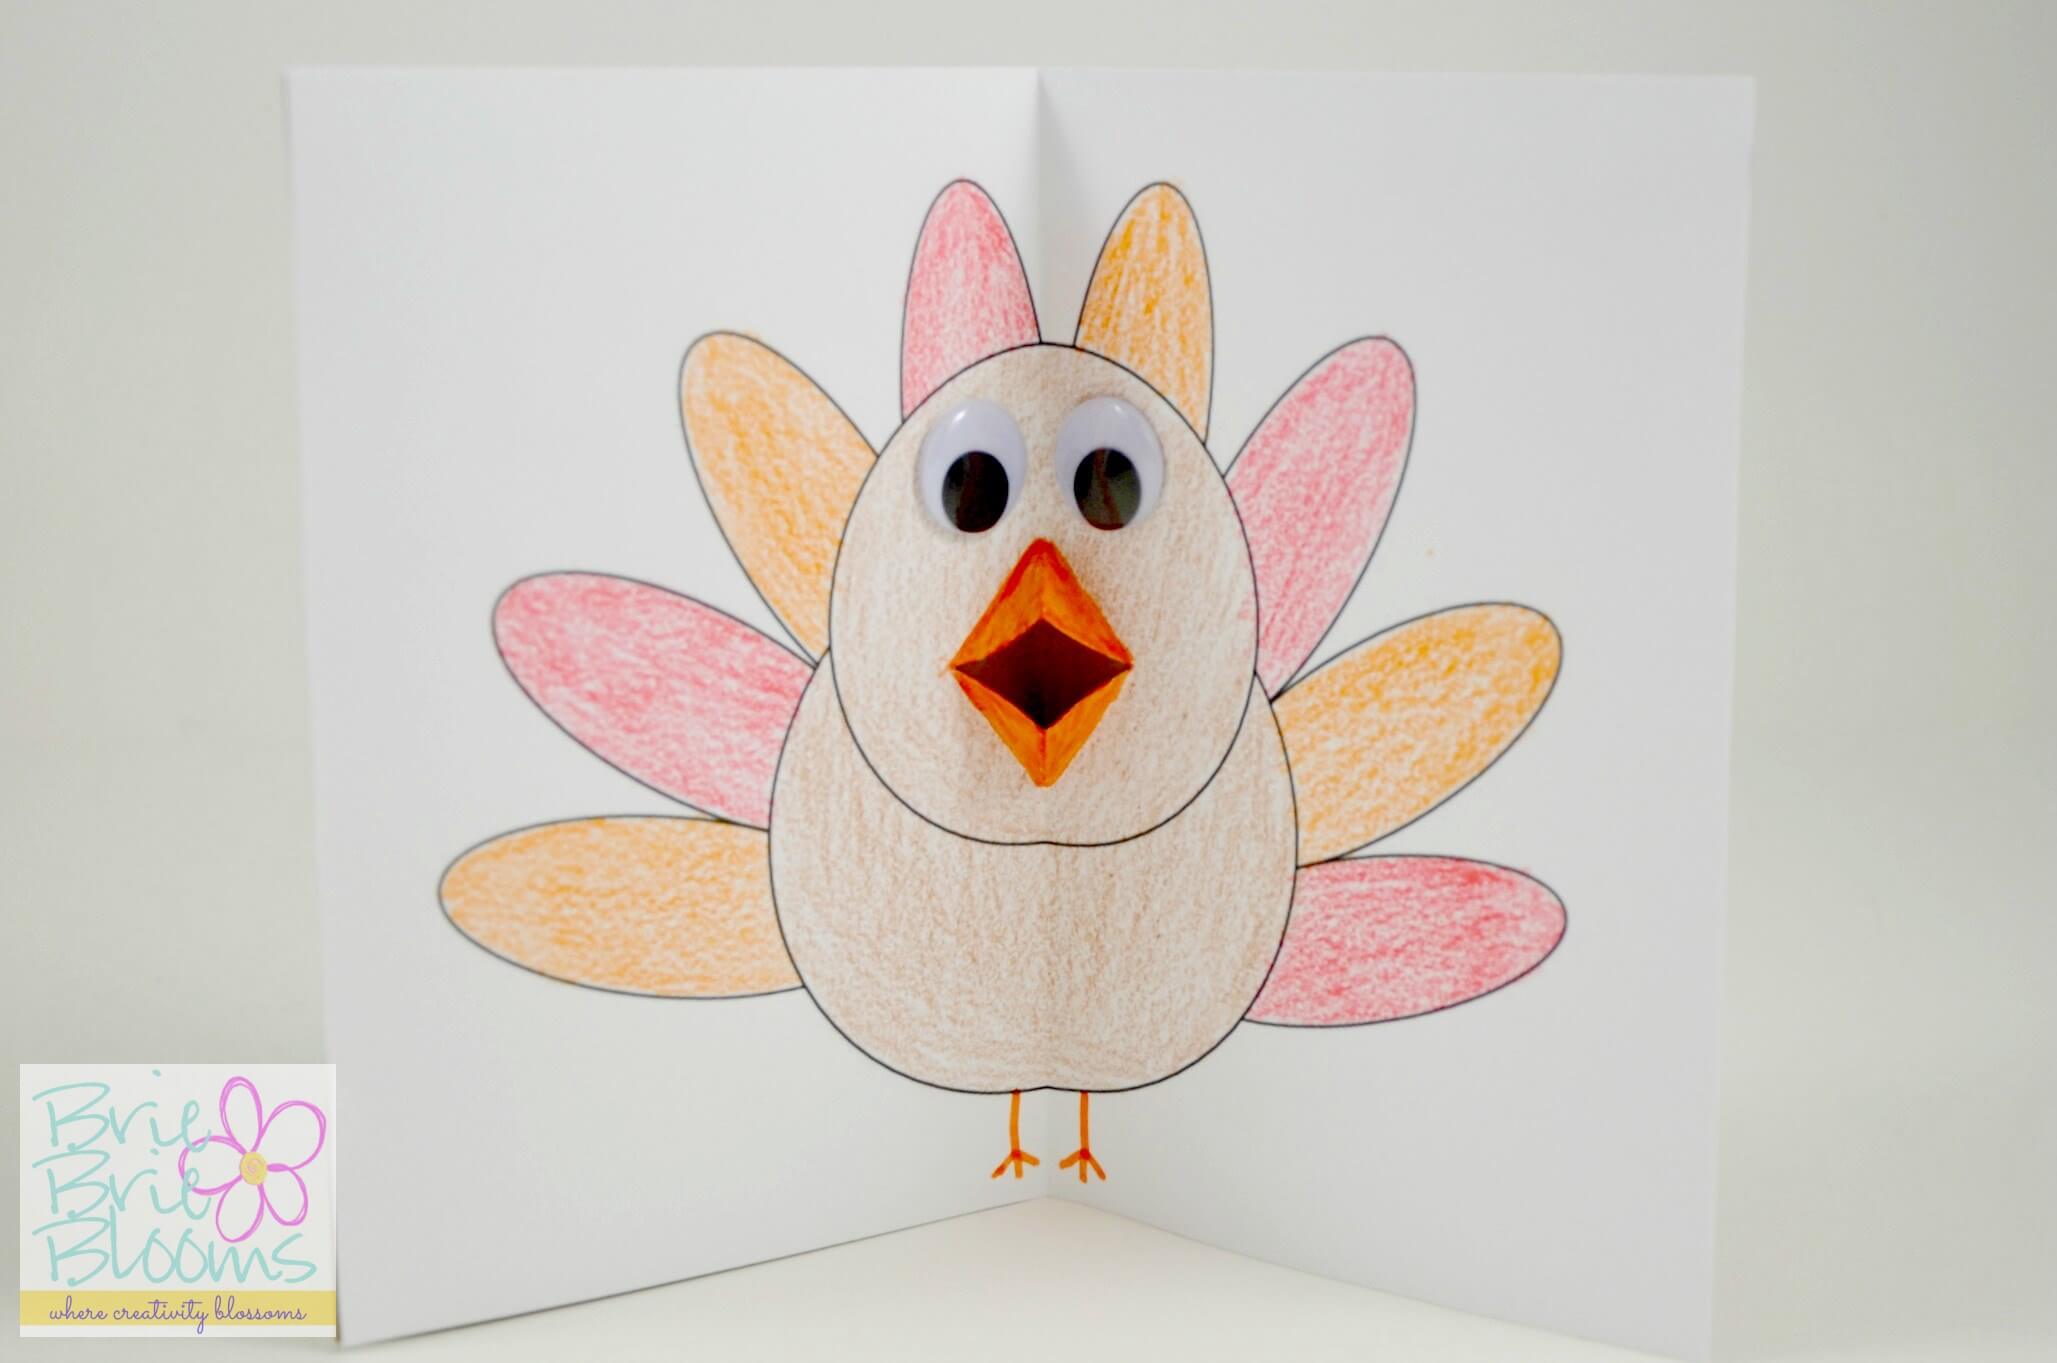 Quick and Simple Thanksgiving Card DIY Activity For Kids And Toddlers DIY Paper Card Ideas for Thanksgiving